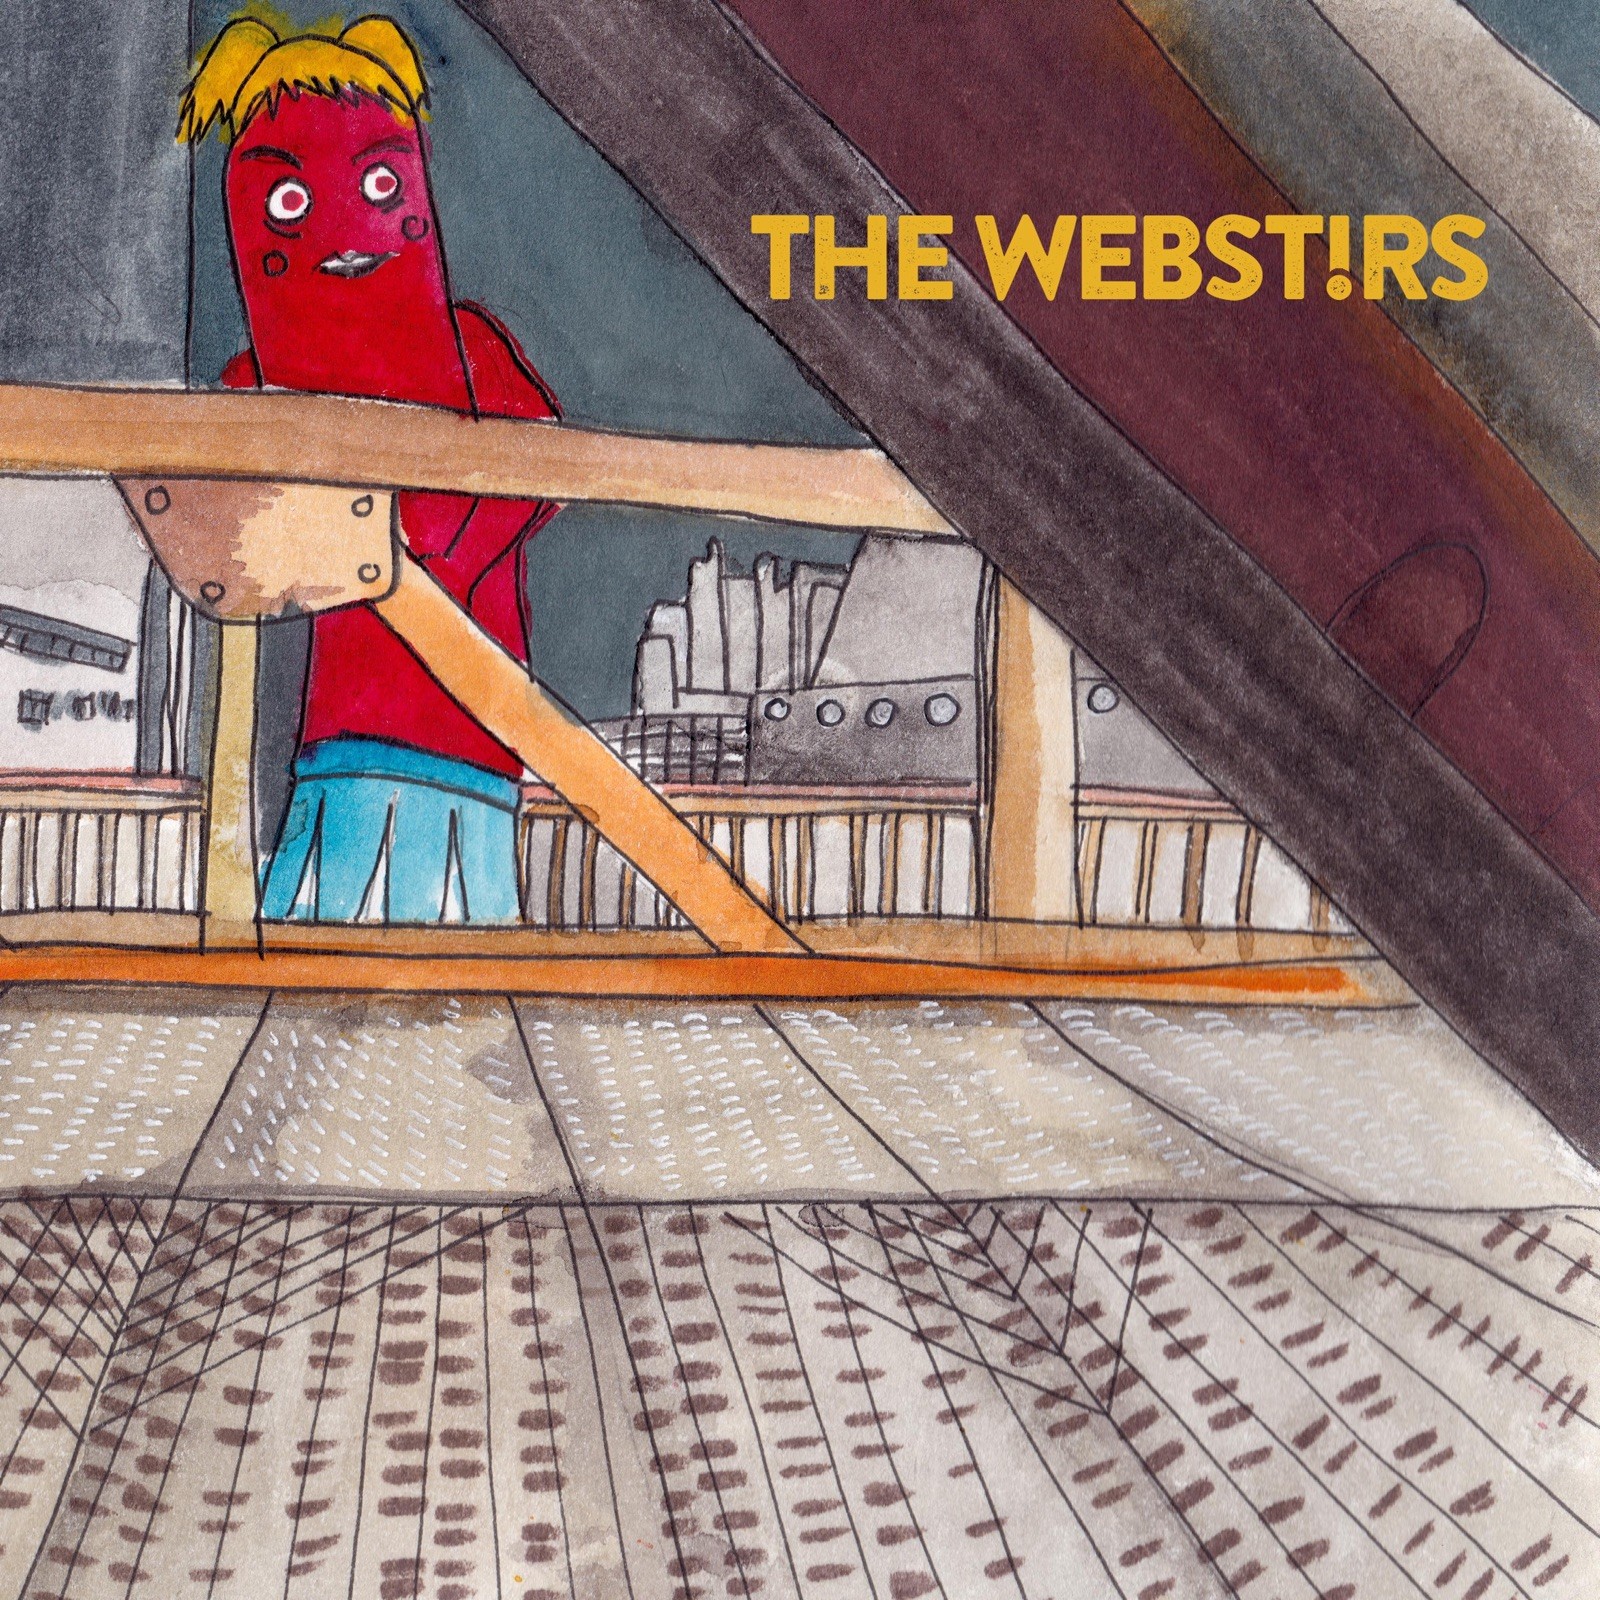 The Webstirs